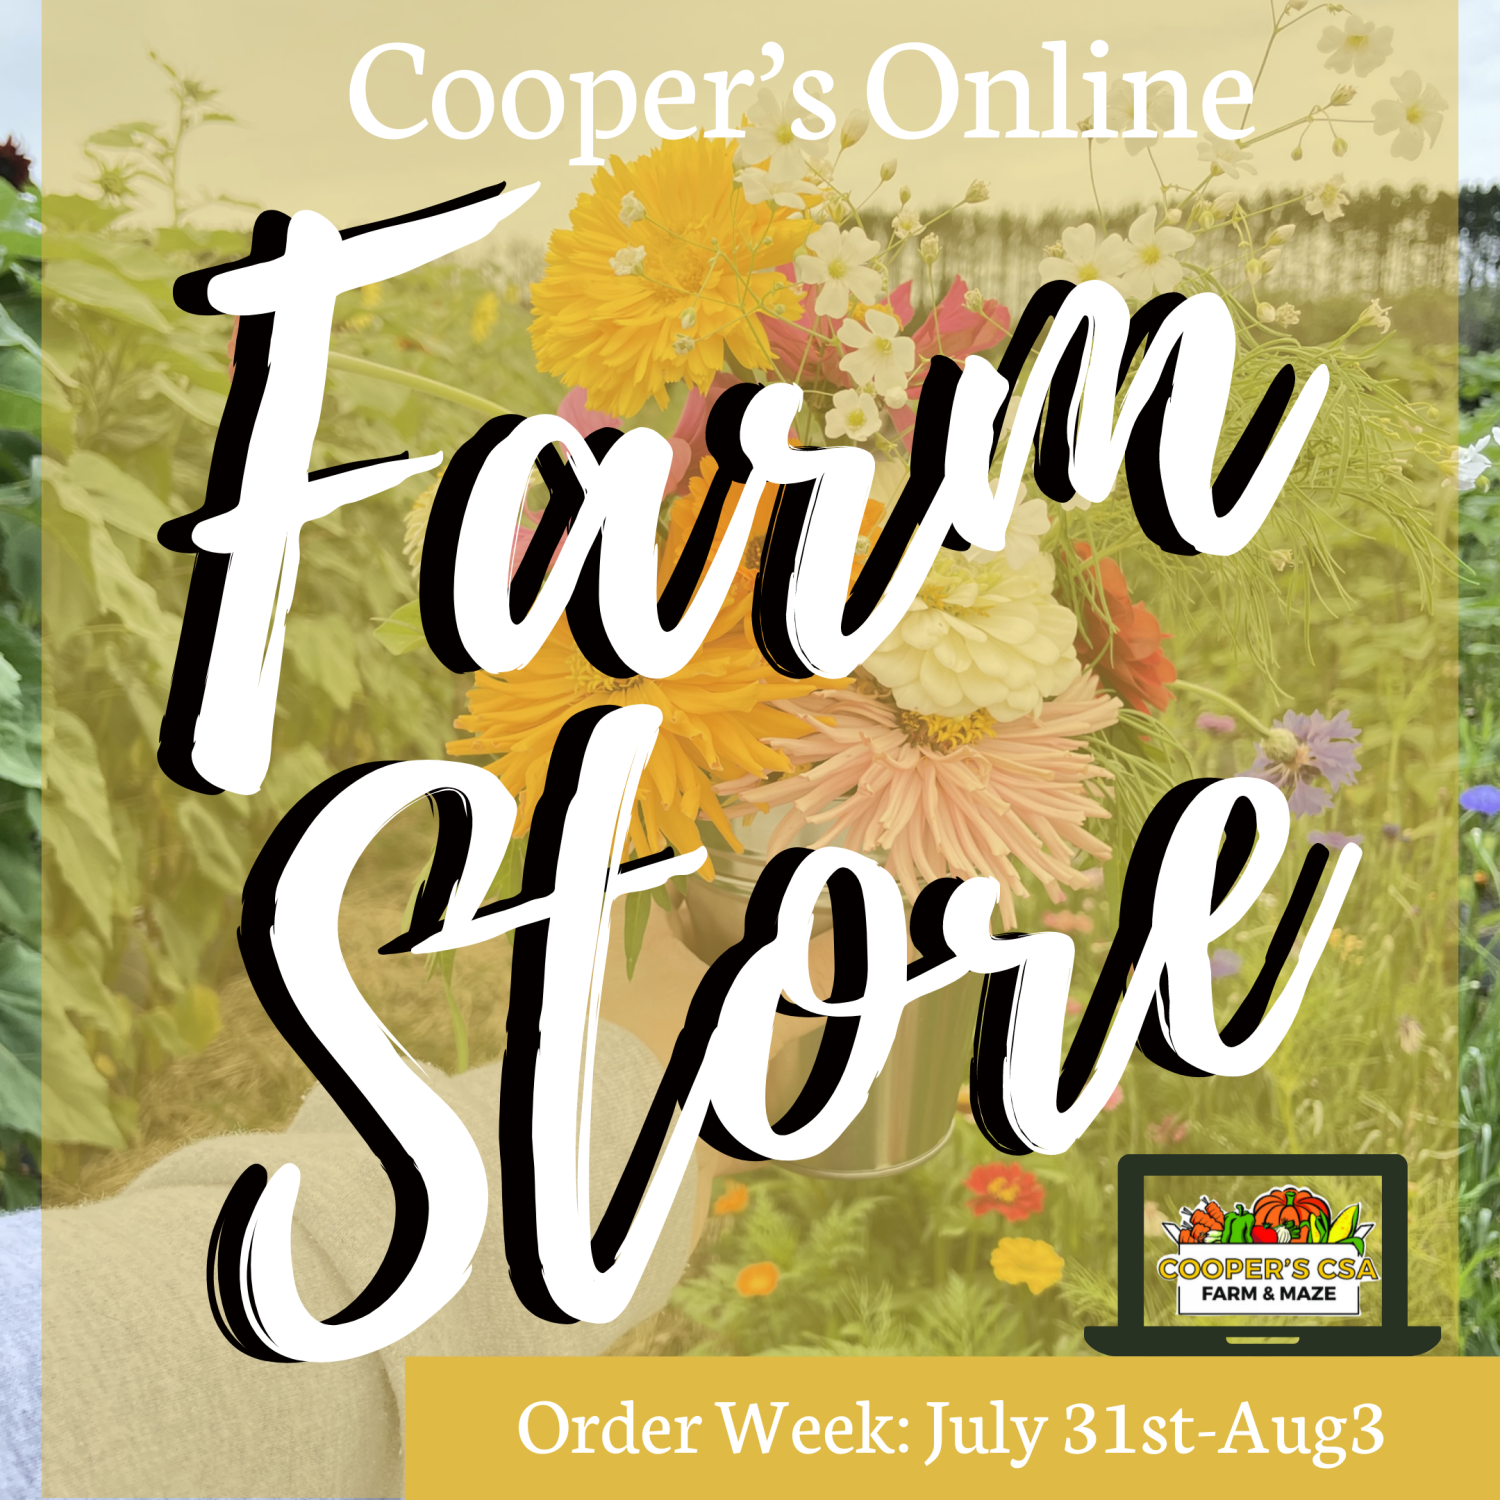 Previous Happening: "The Farm Box"-Coopers CSA Farm Farm Happenings July 31st-Aug. 3rd